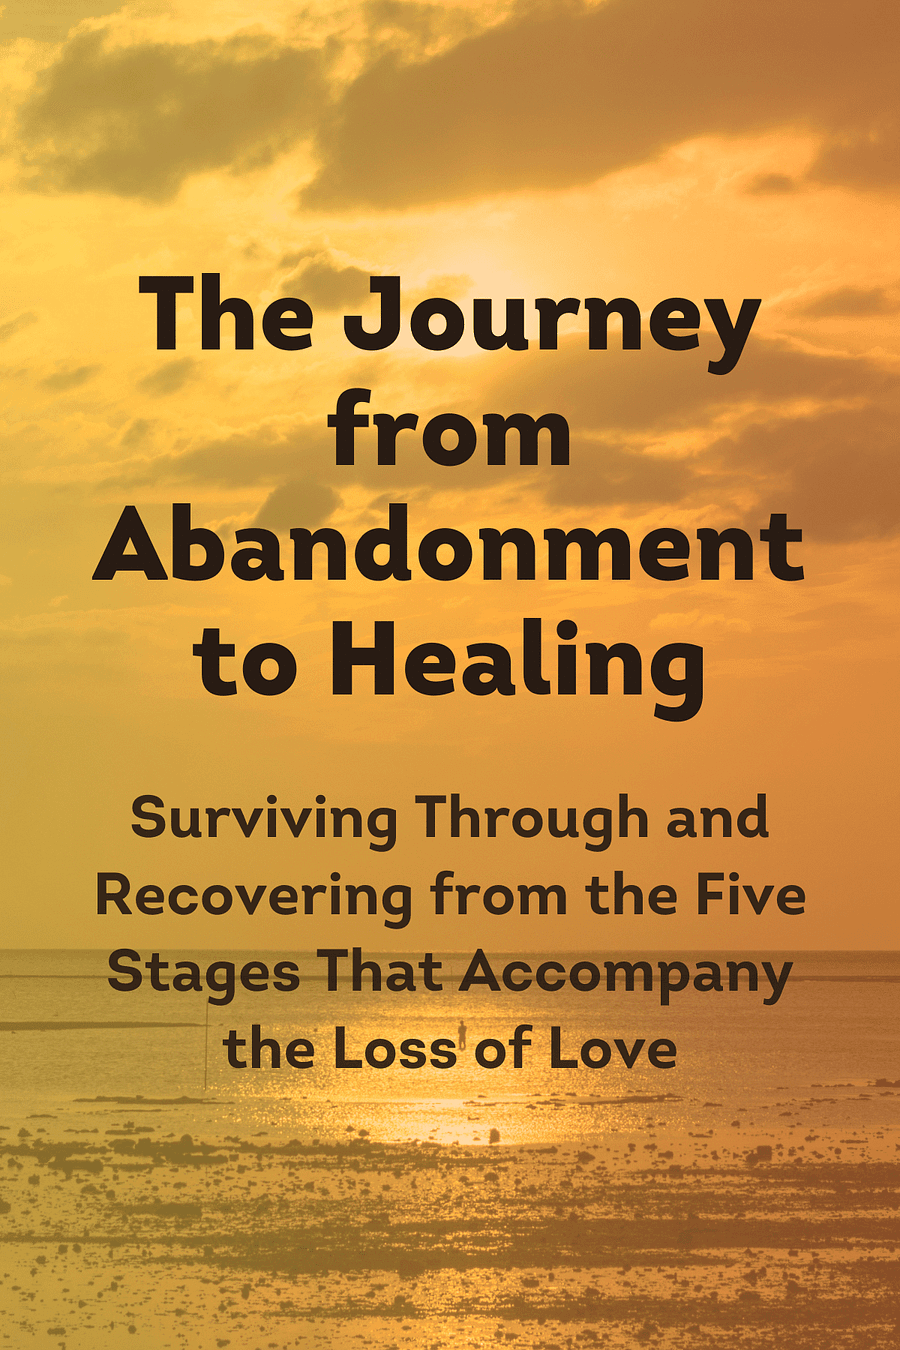 The Journey from Abandonment to Healing by Susan Anderson - Book Summary